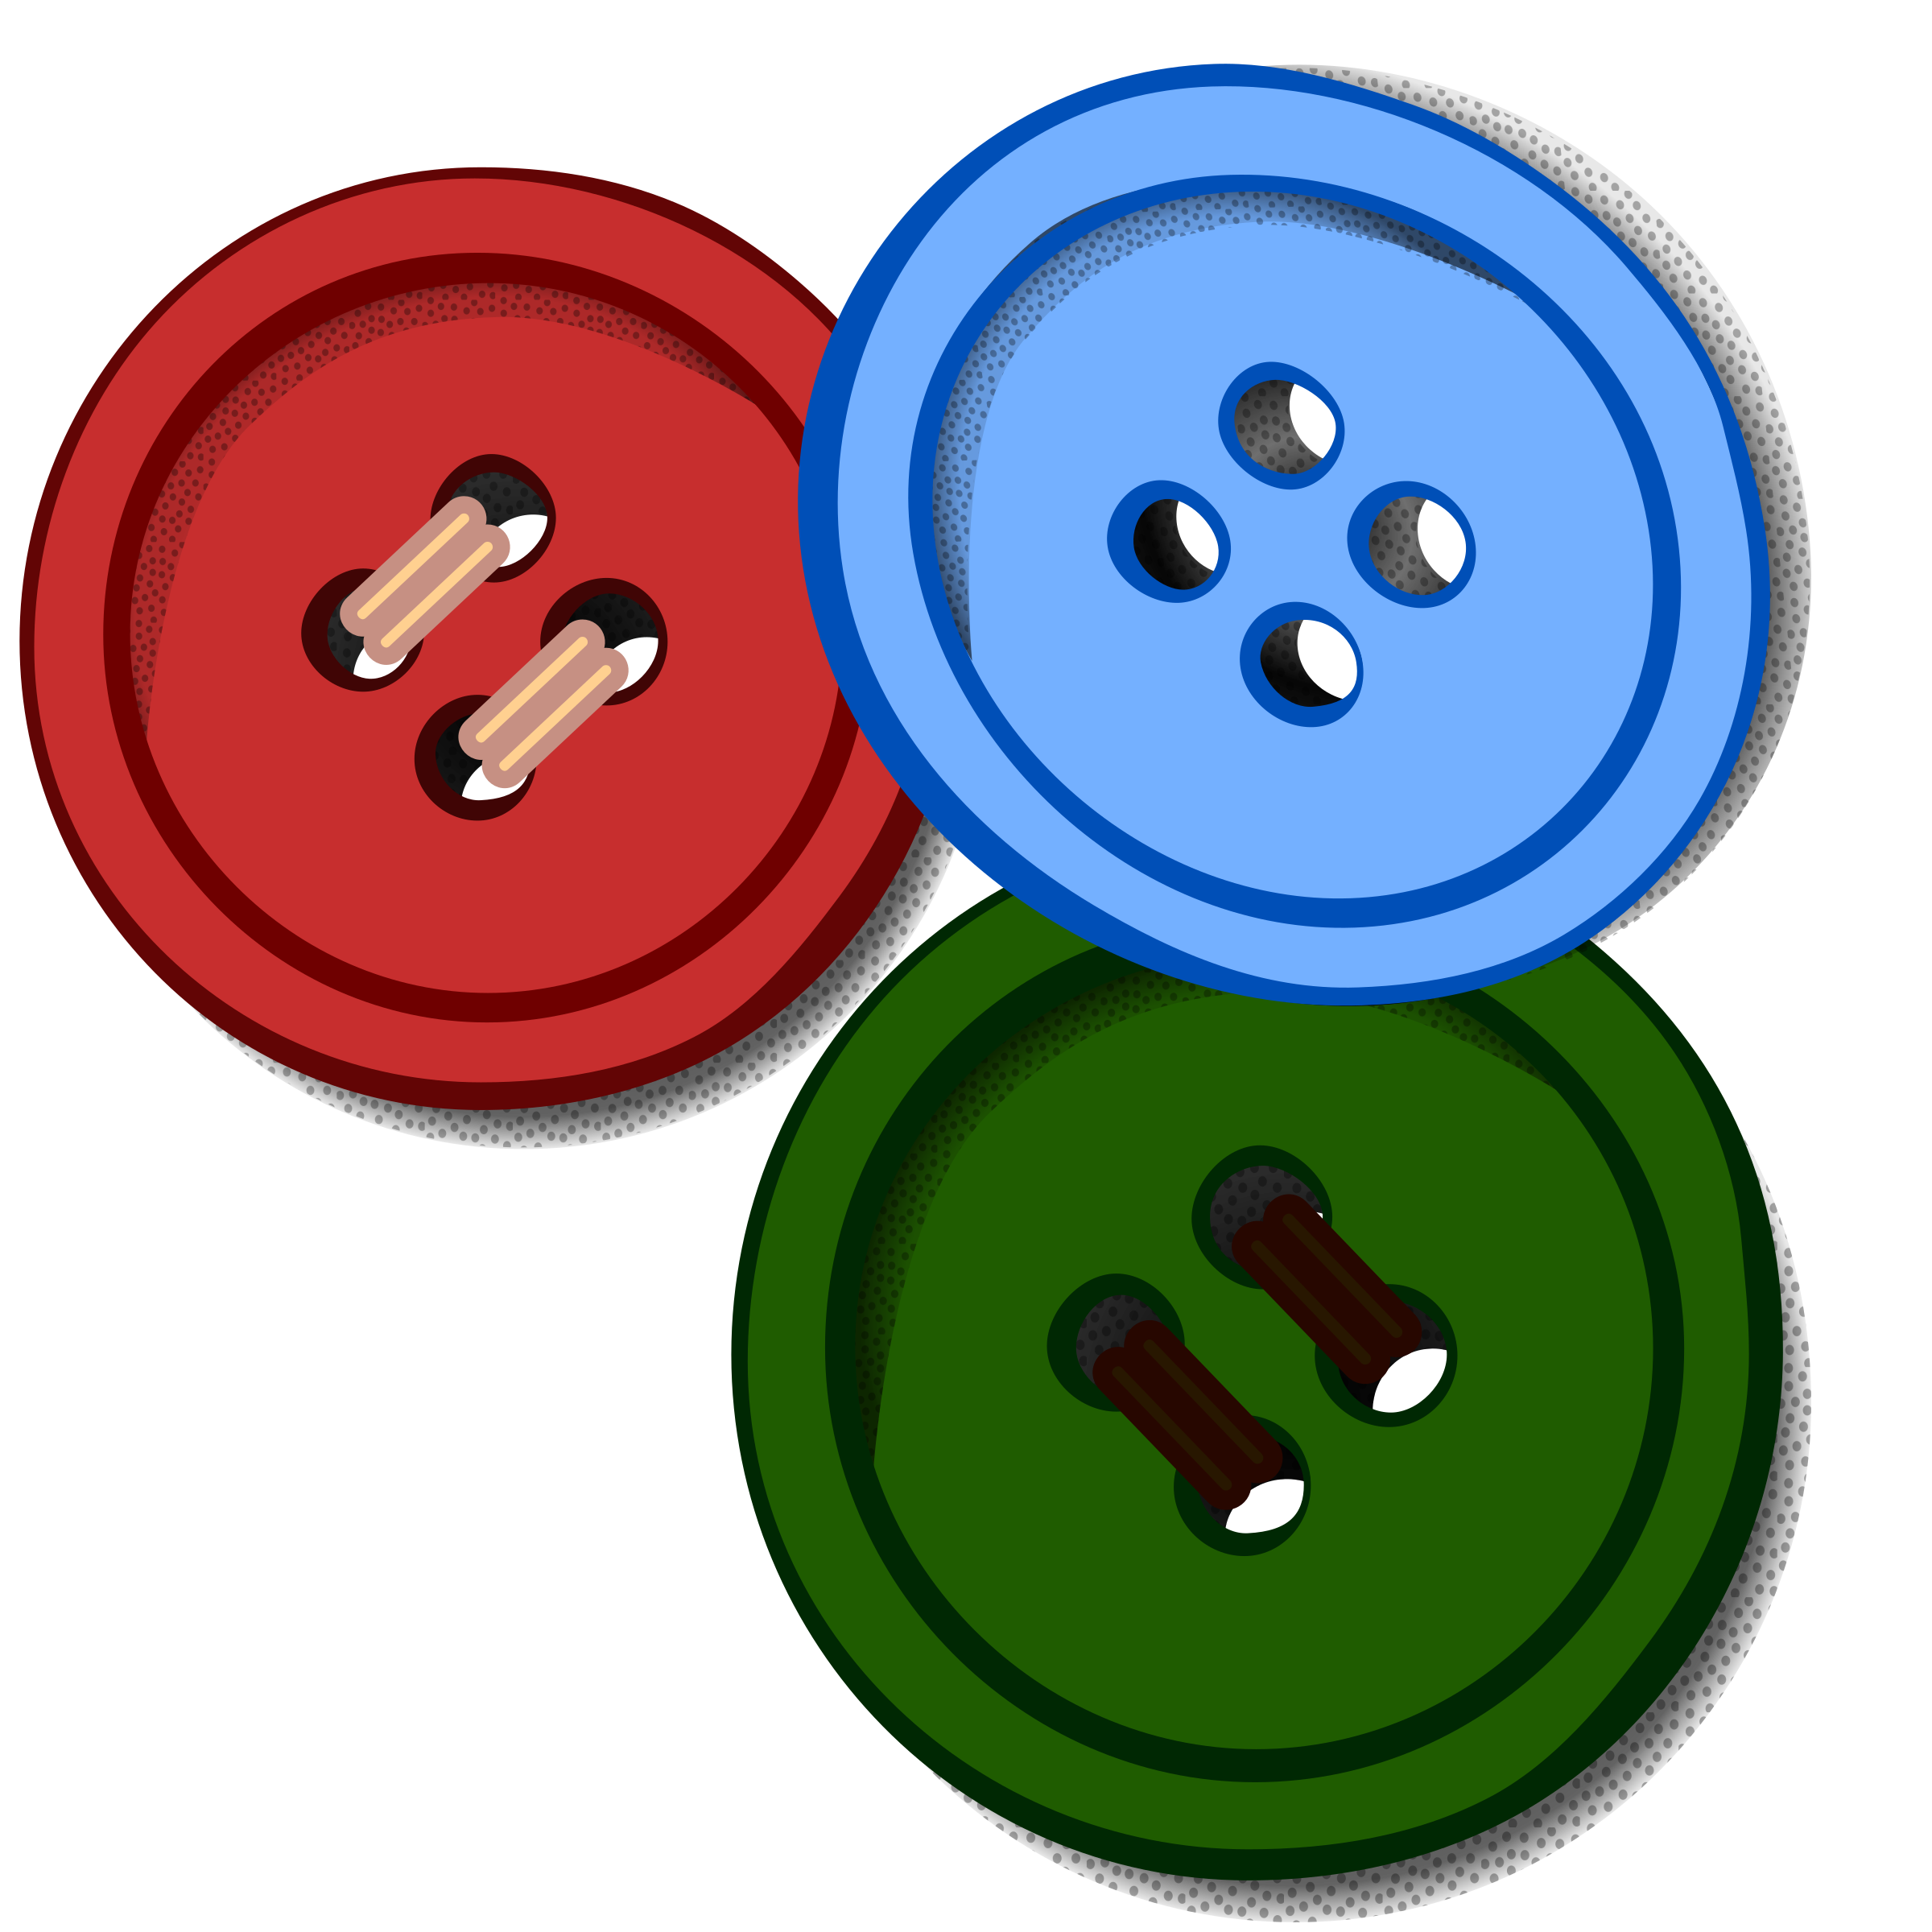 Colored Buttons vector files image - Free stock photo - Public Domain photo - CC0 Images